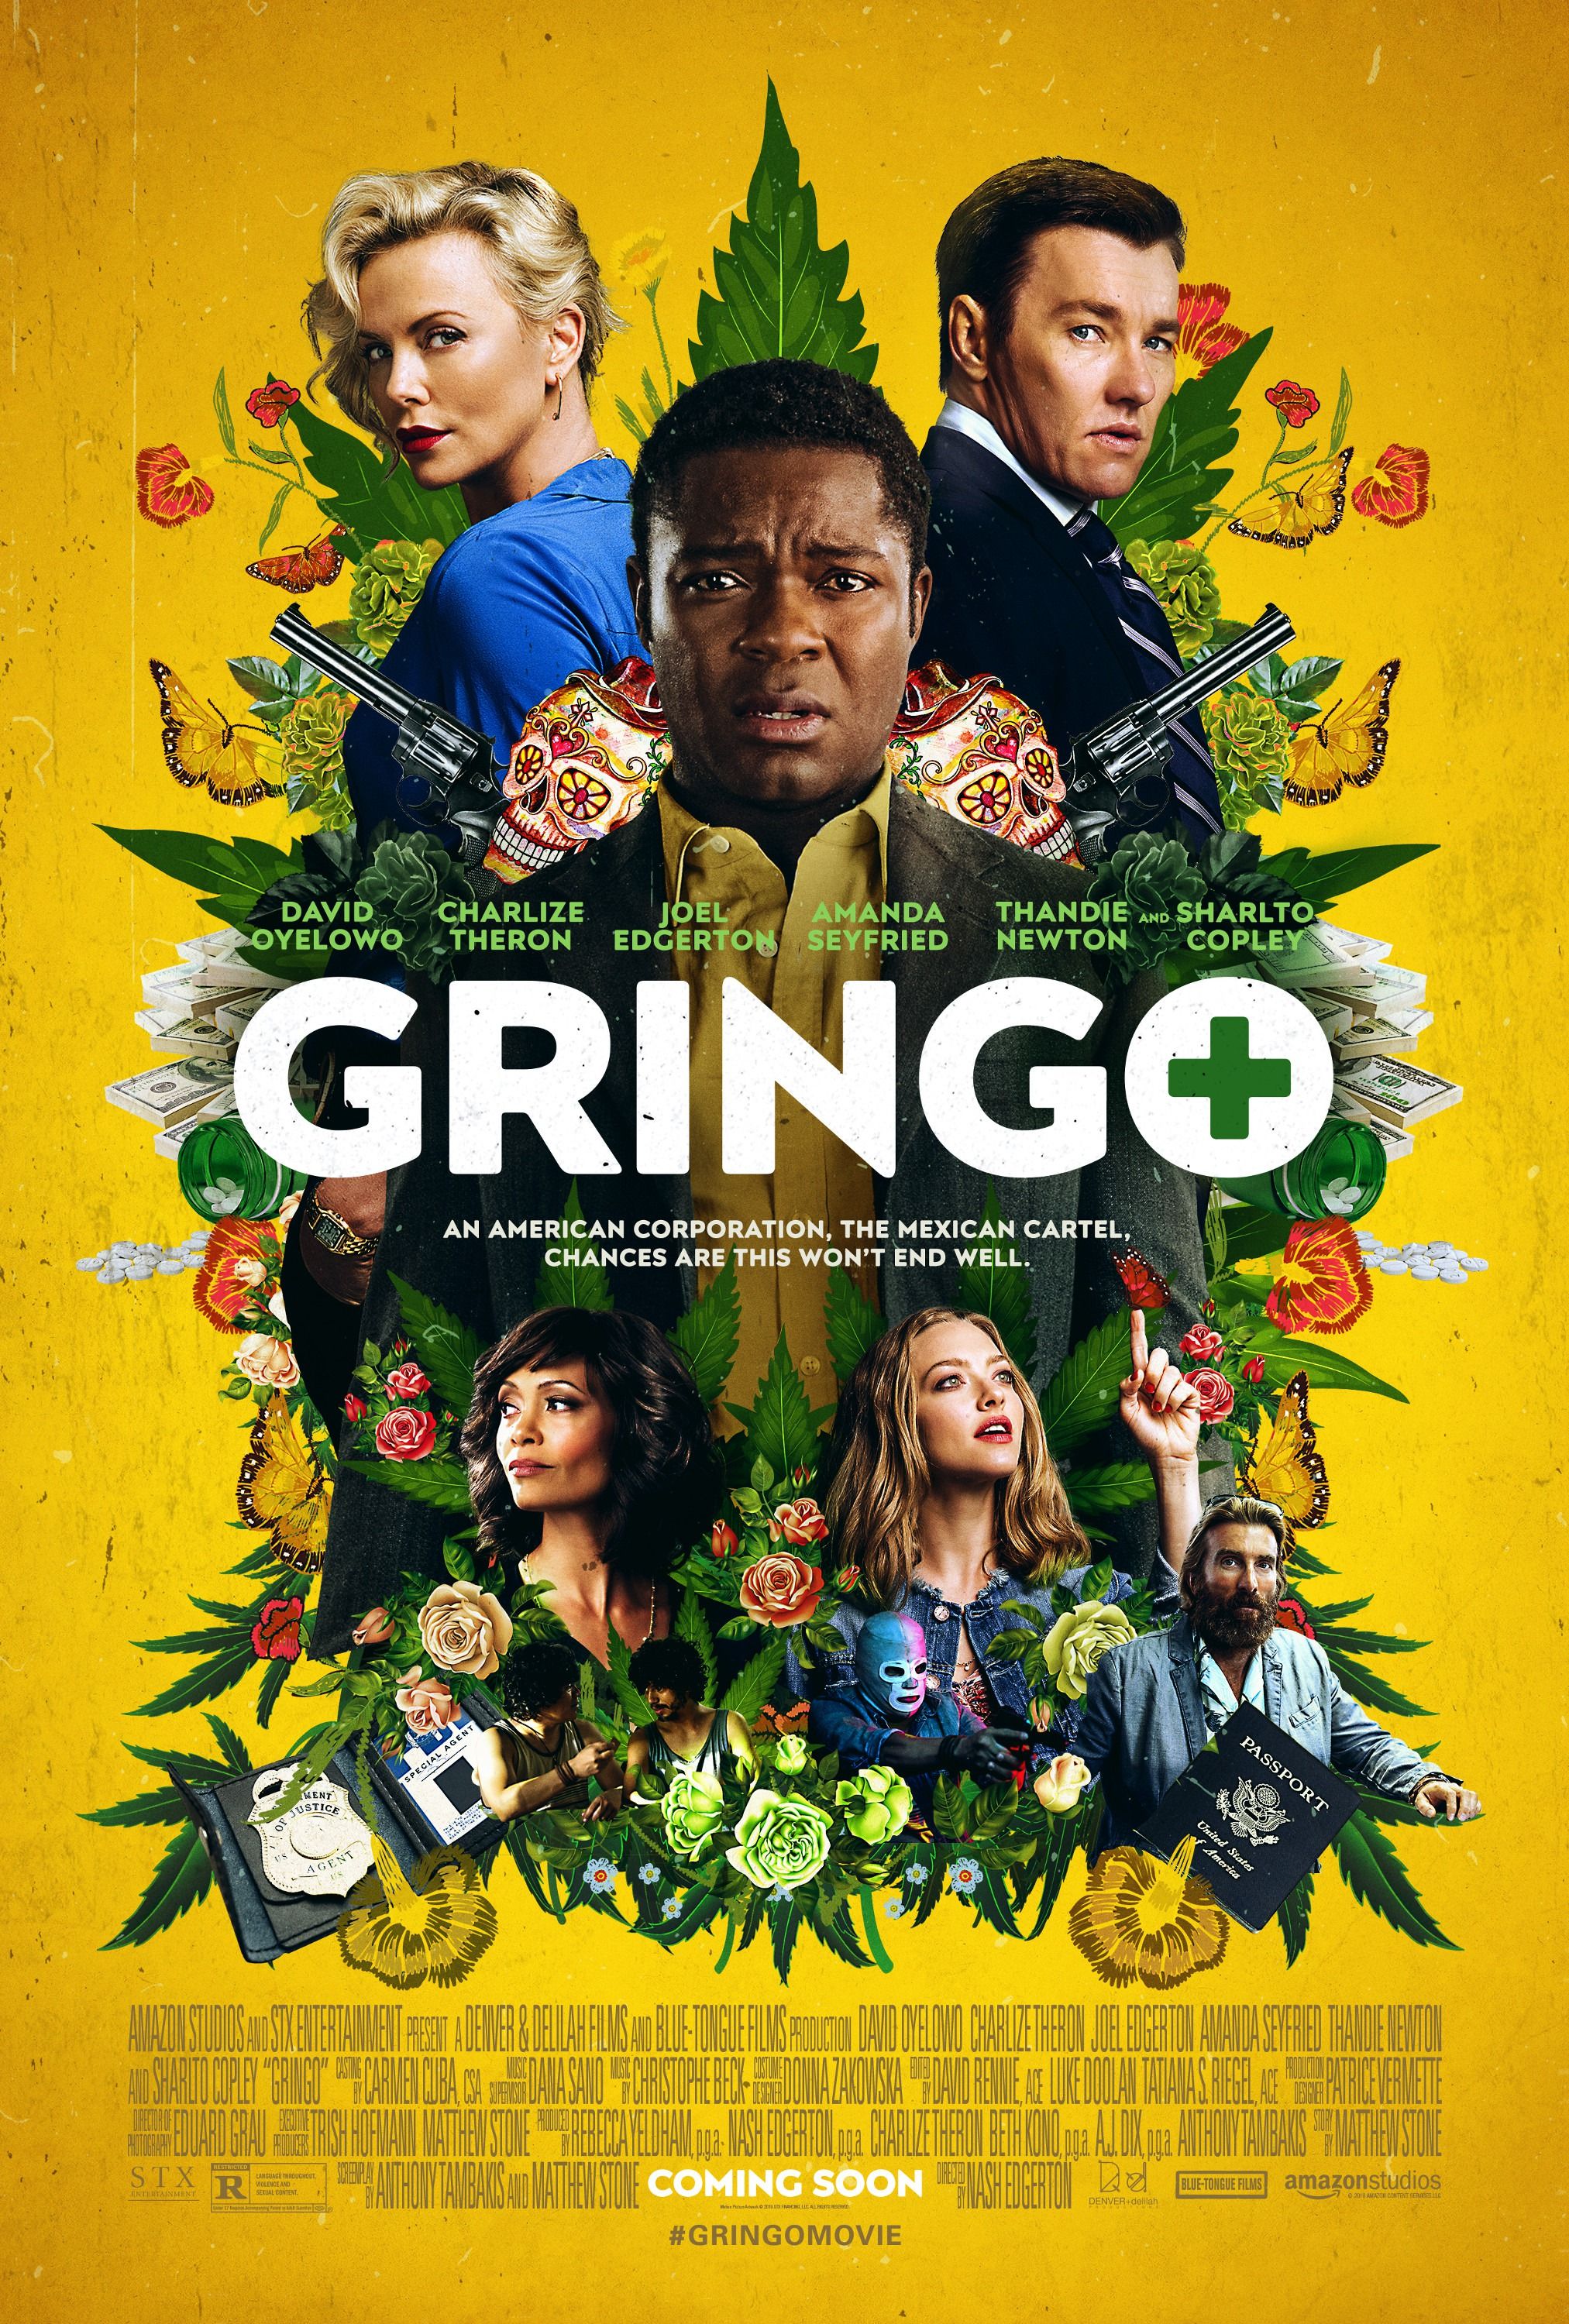 Gringo official movie poster